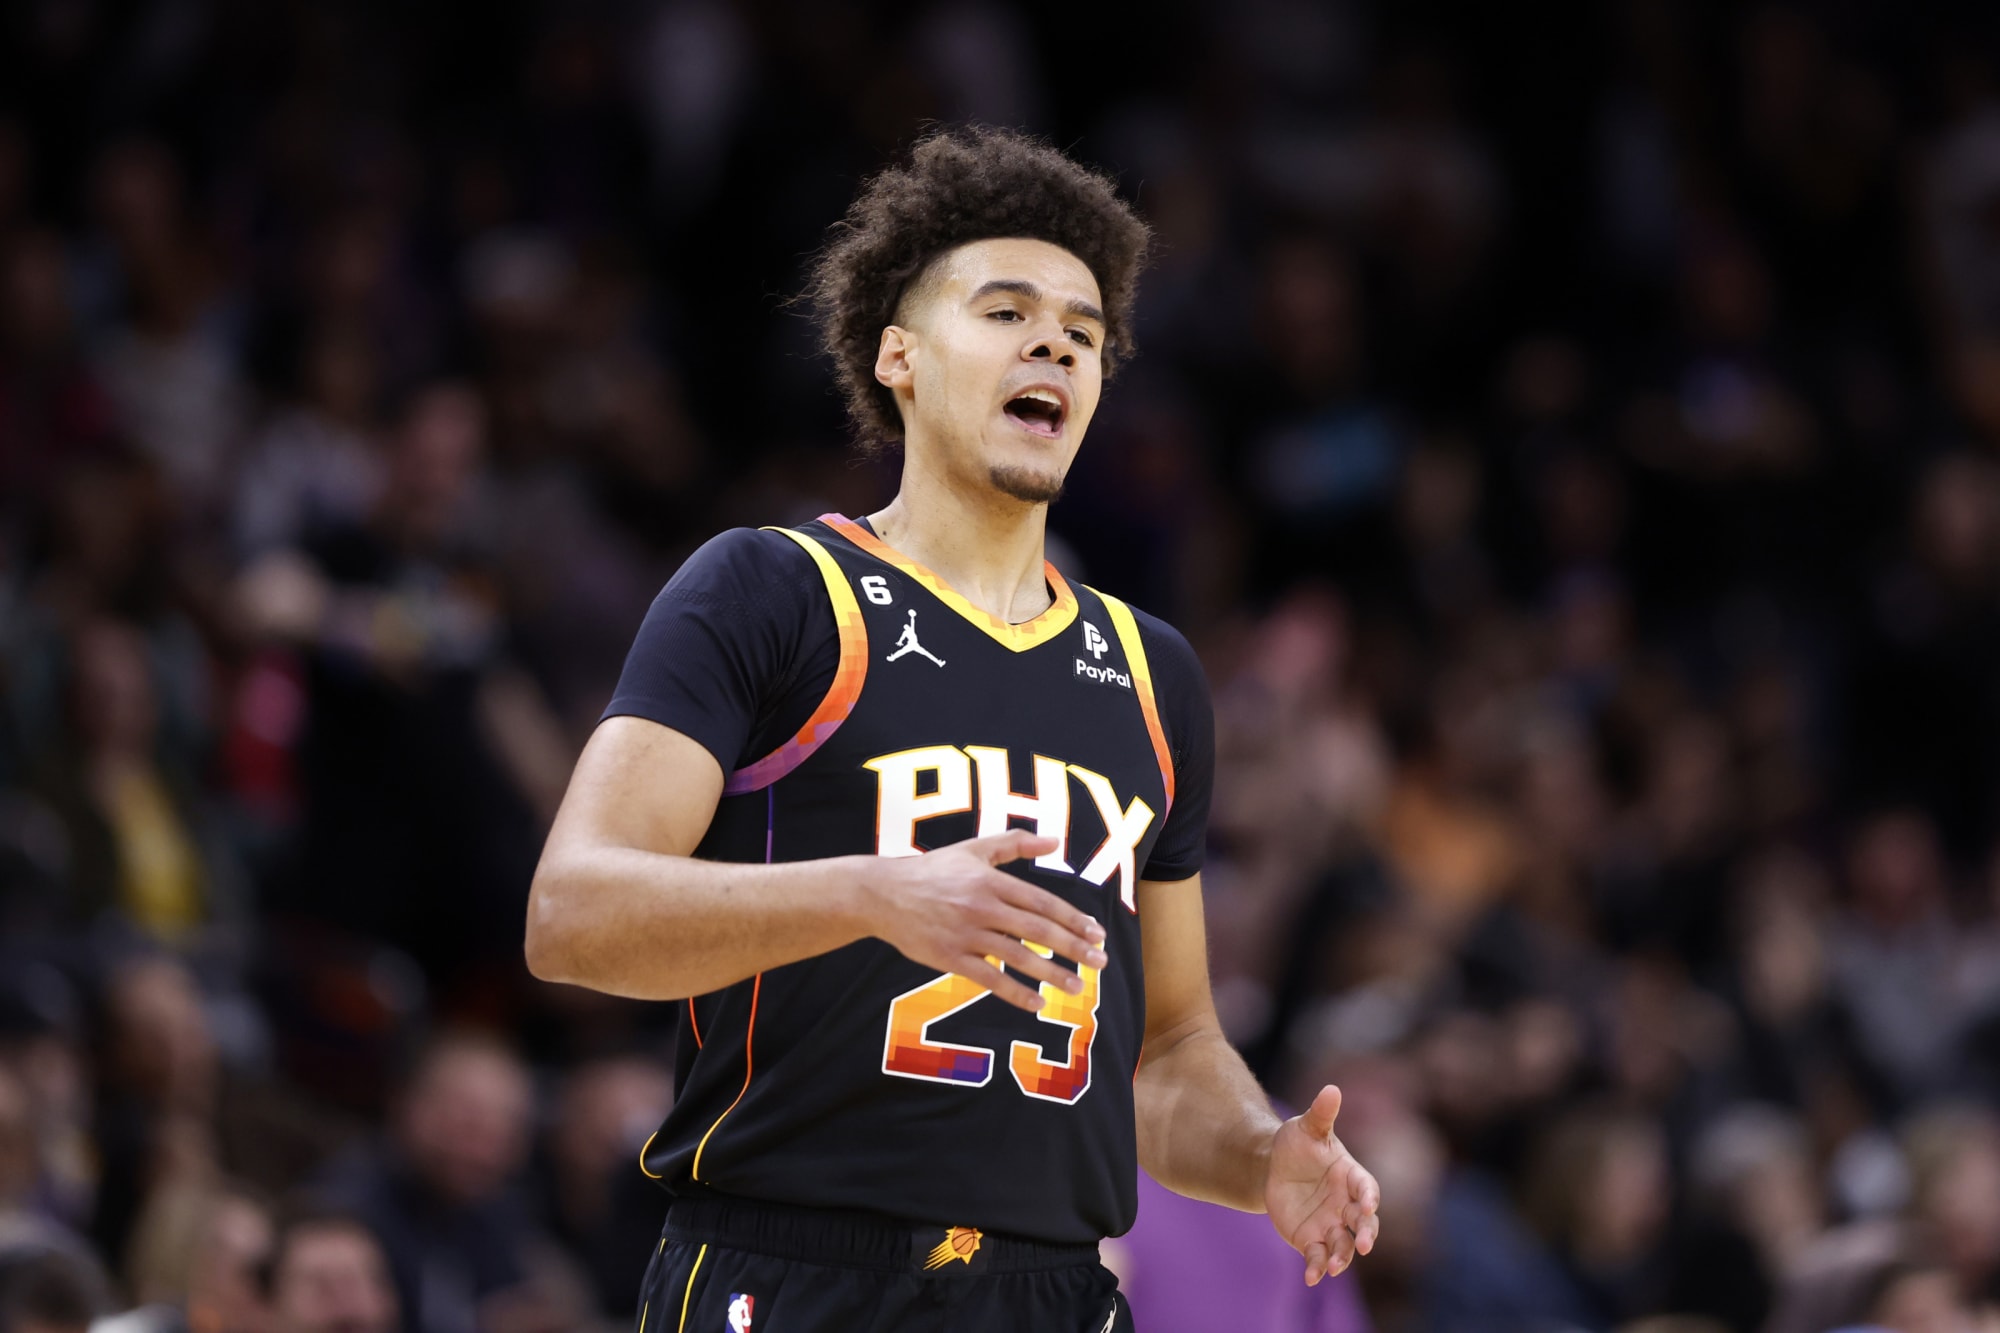 UNC Basketball: Suns blow out Pelicans behind Cam Johnson's 18 points